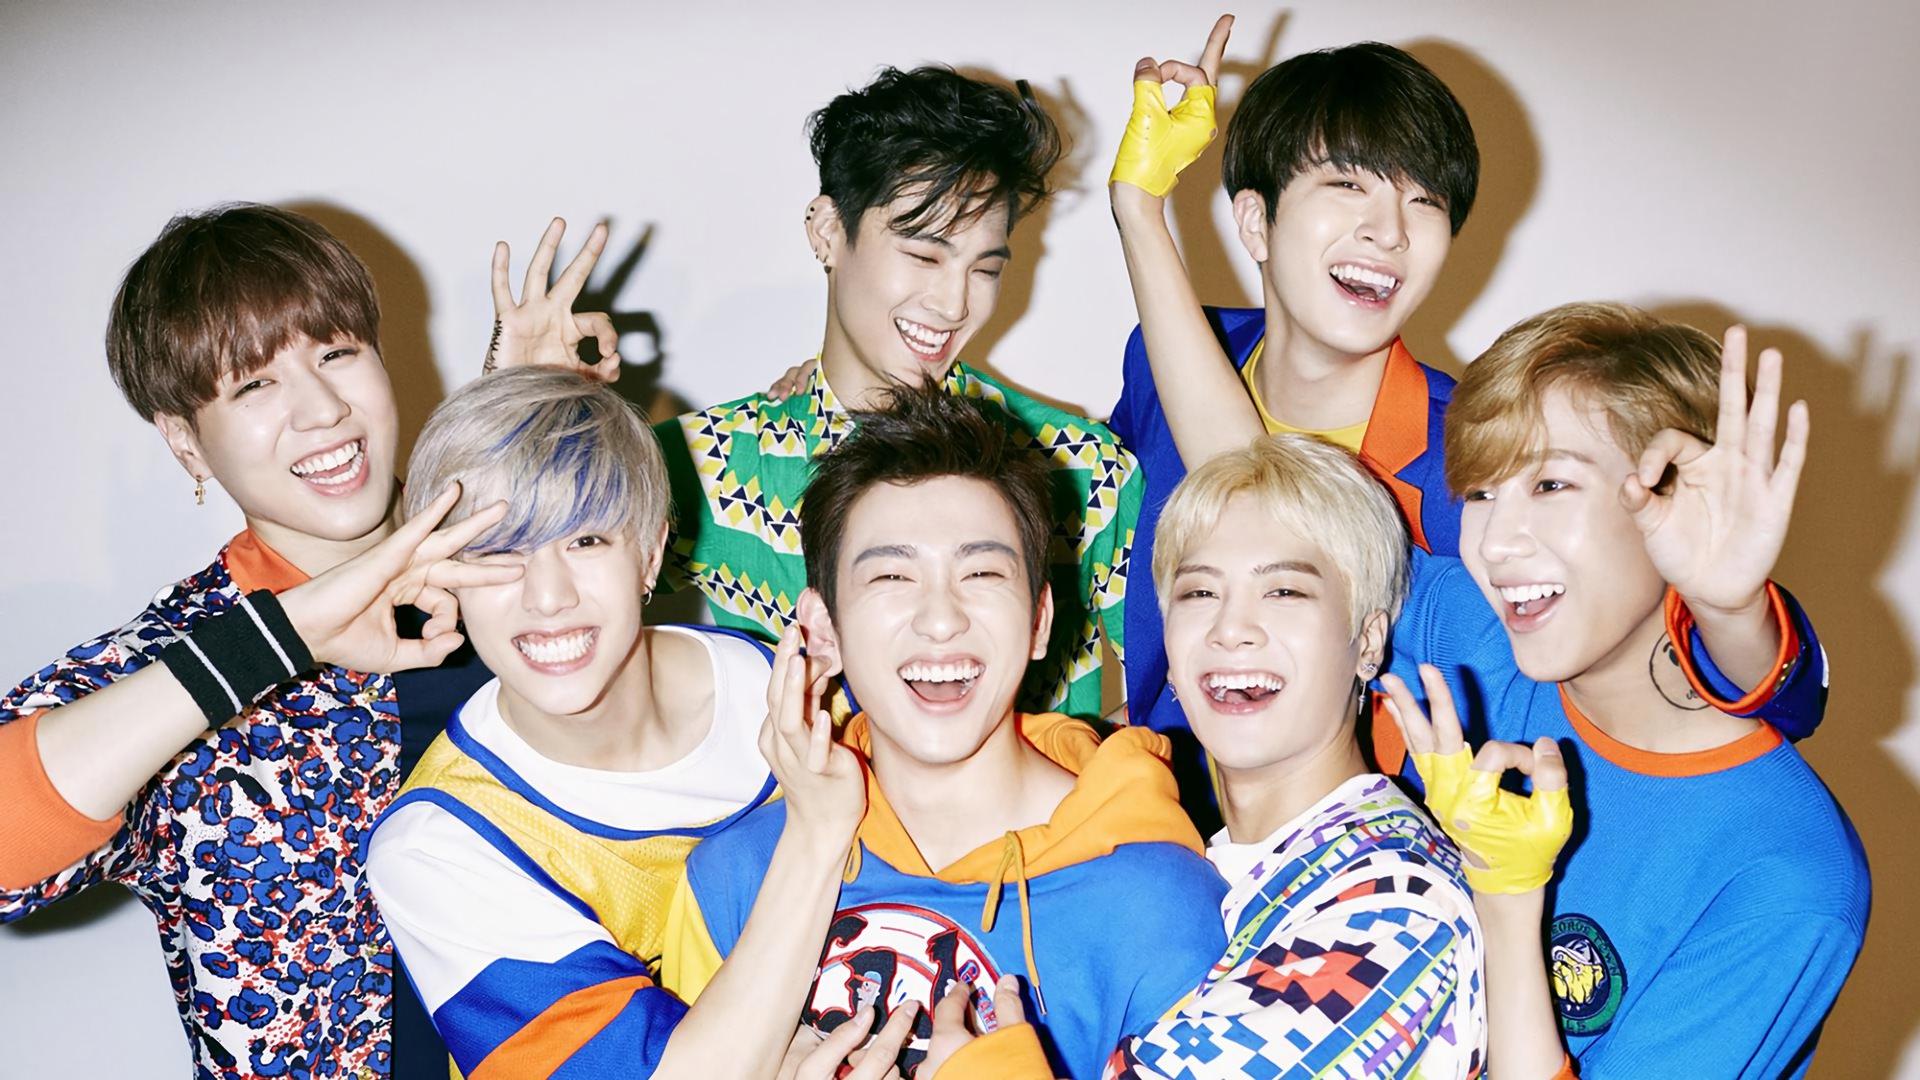 Download astro kpop wallpaper tumblr Up To 4K Ultra HD